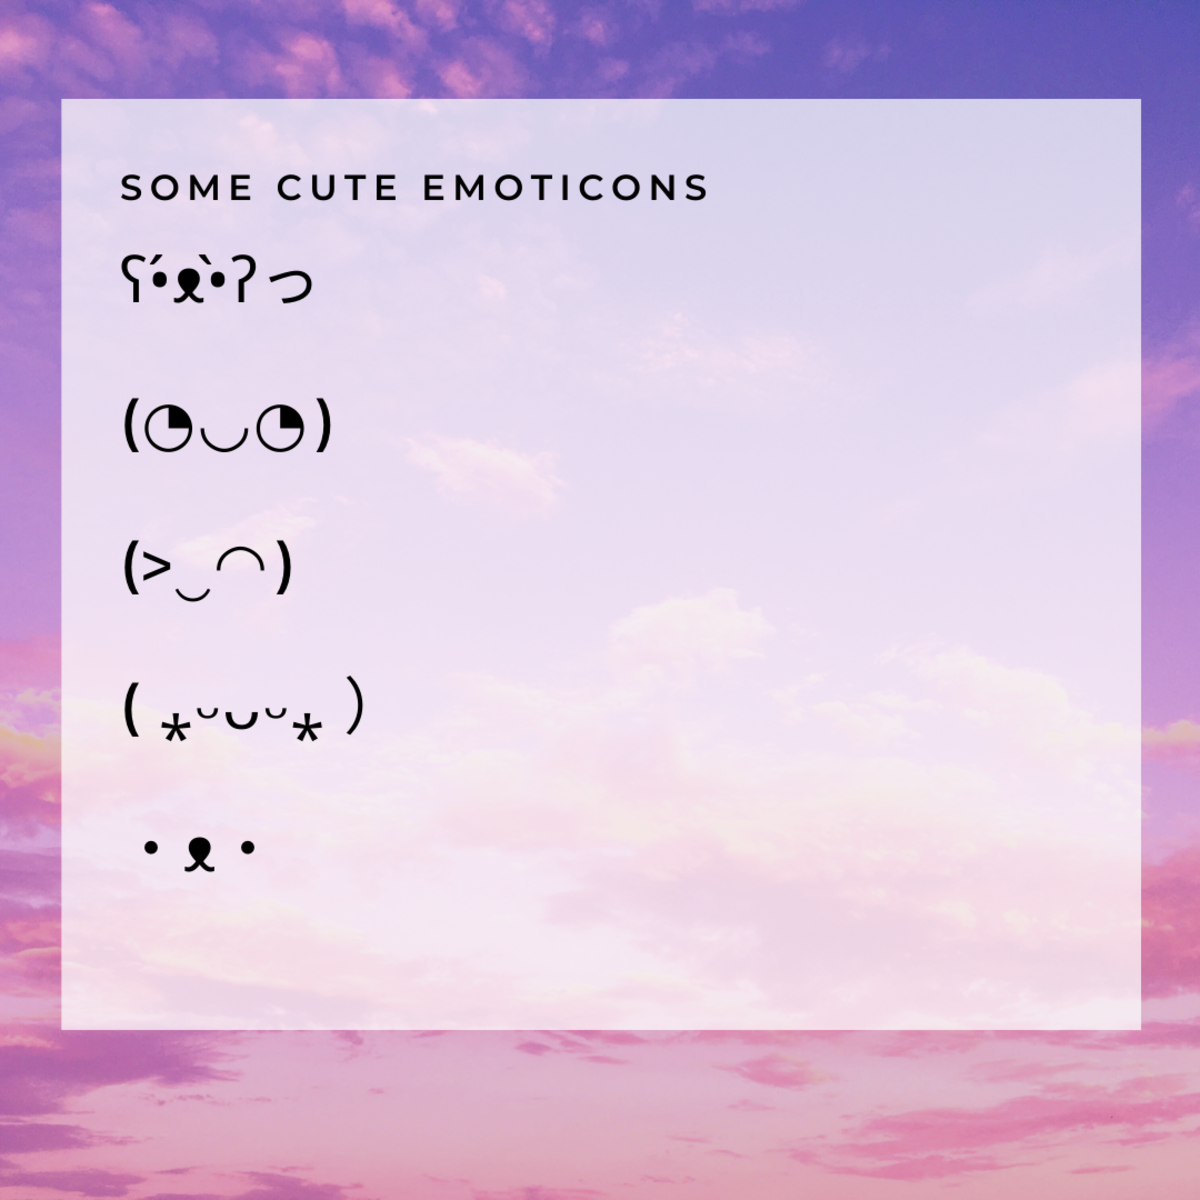 You could combine symbols in order to create cute emoticons, such as those above!